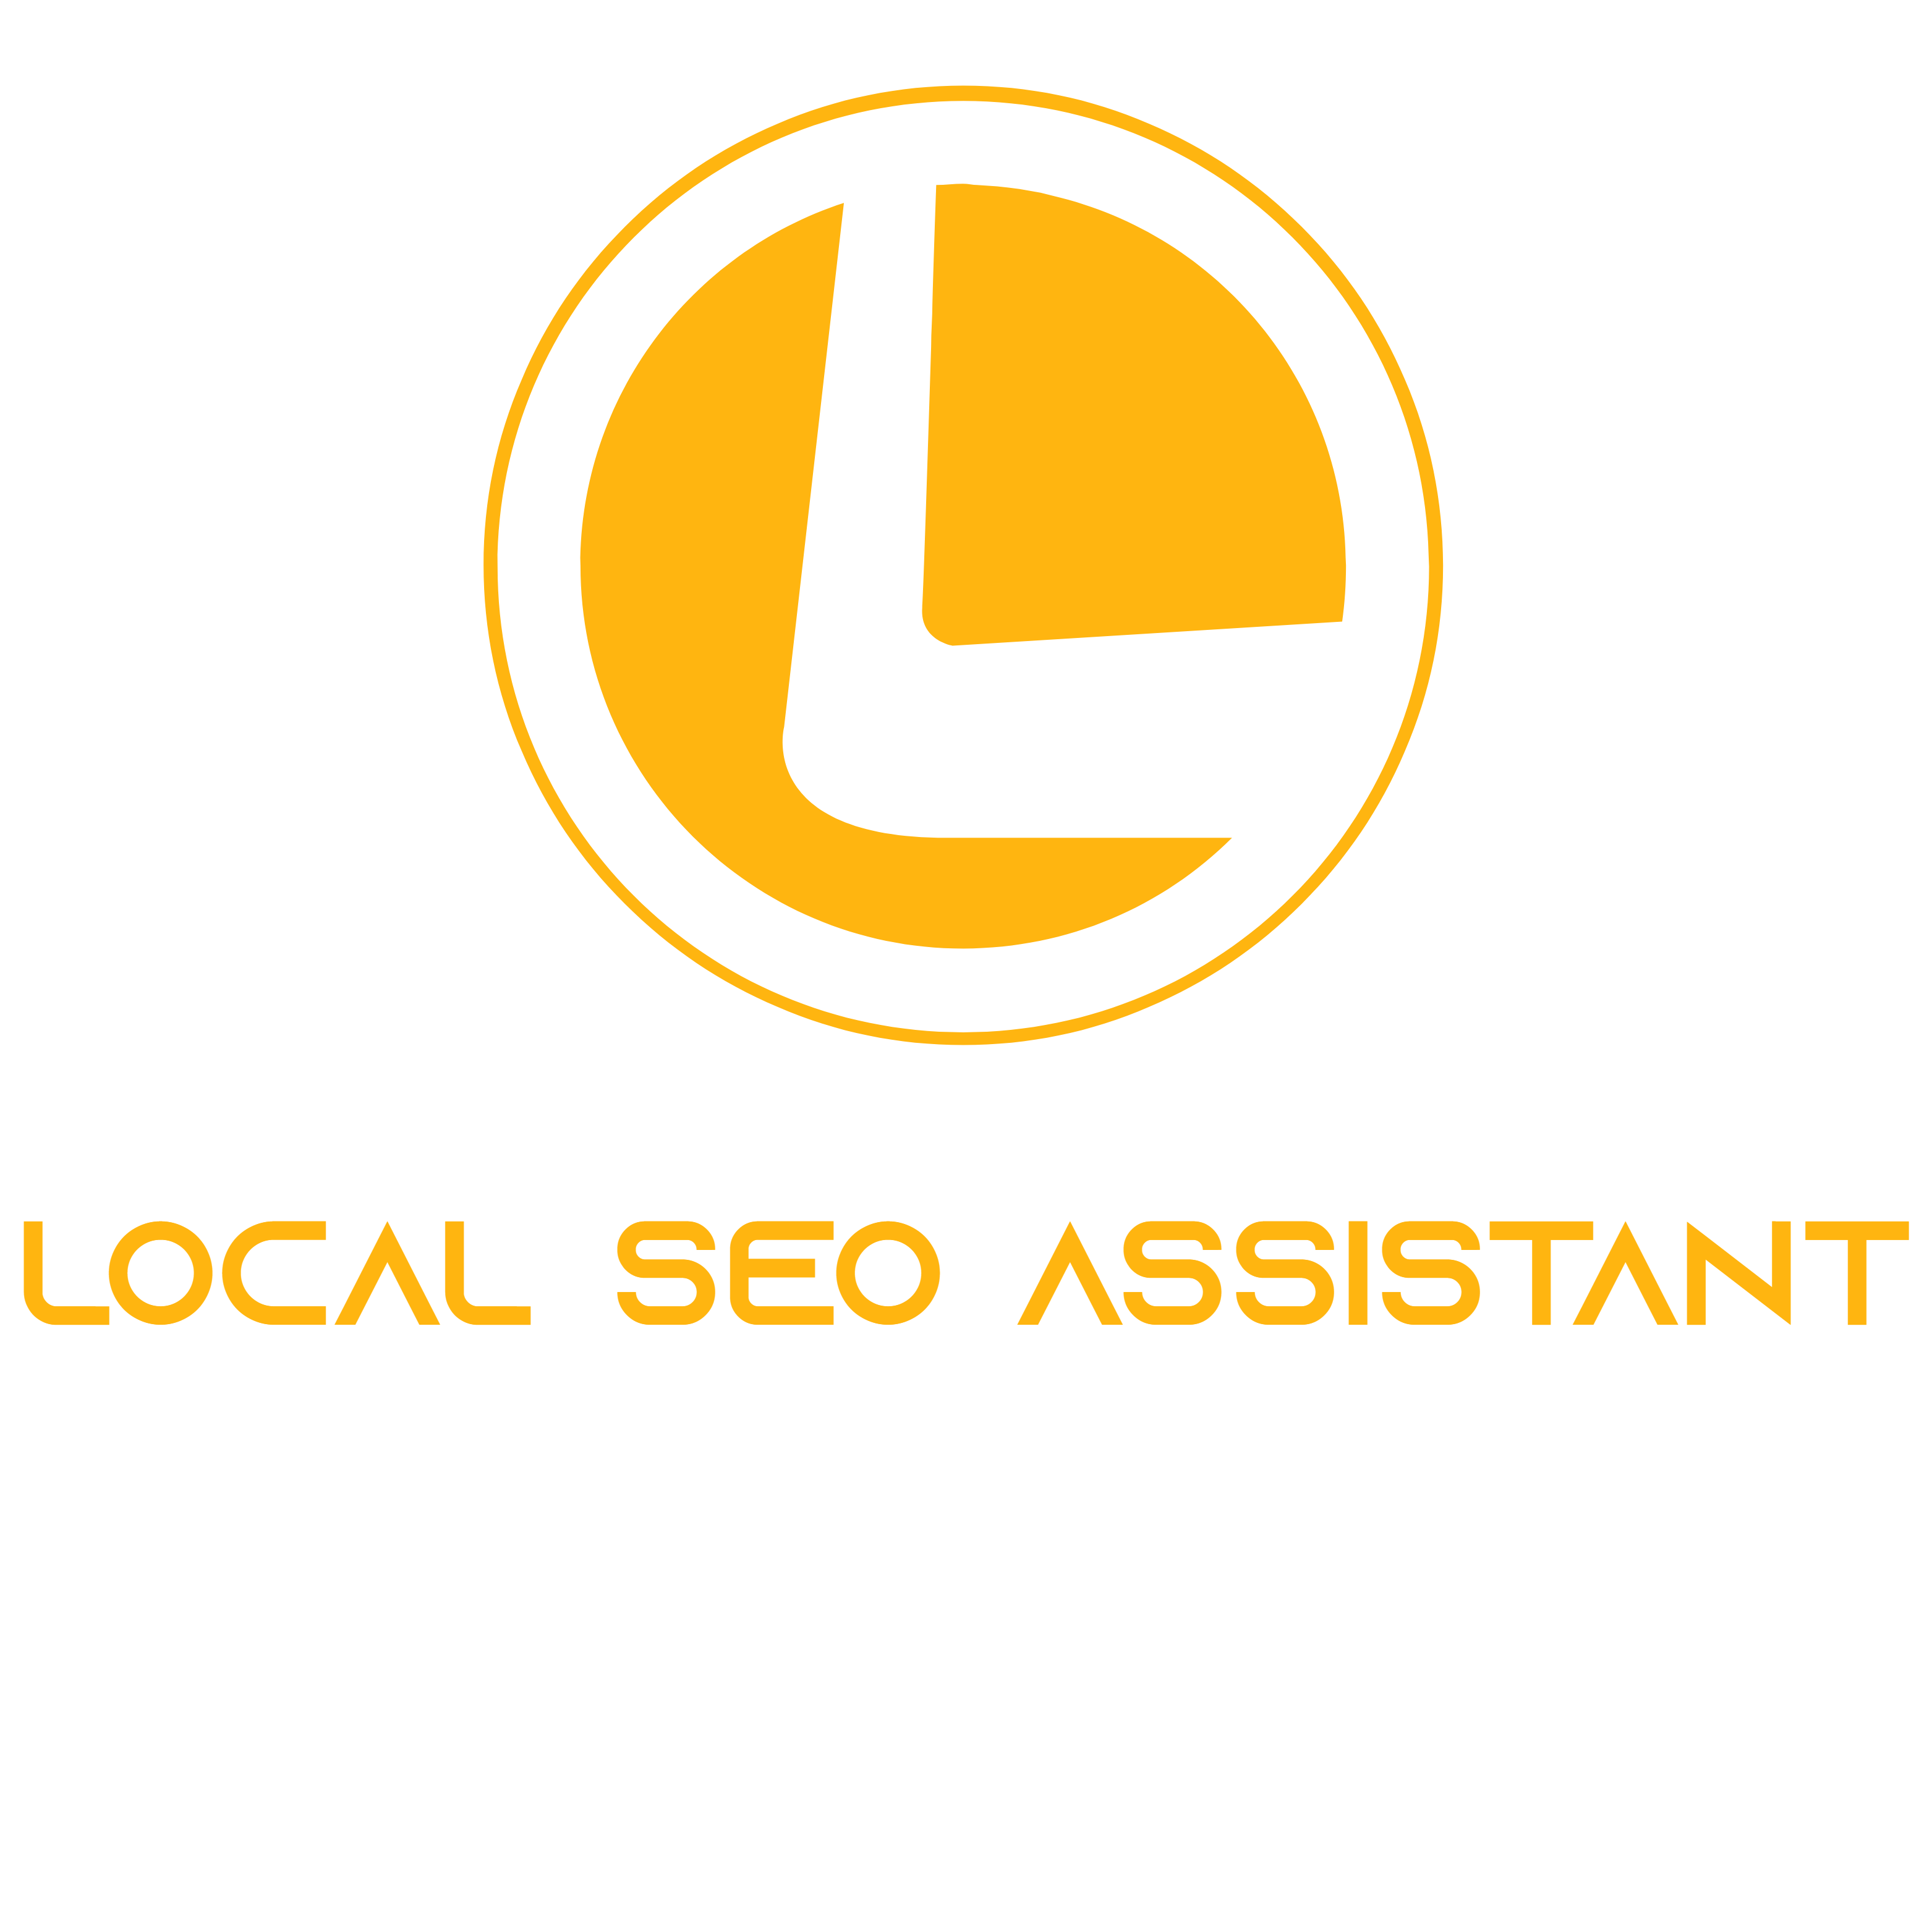 Local SEO Assistant